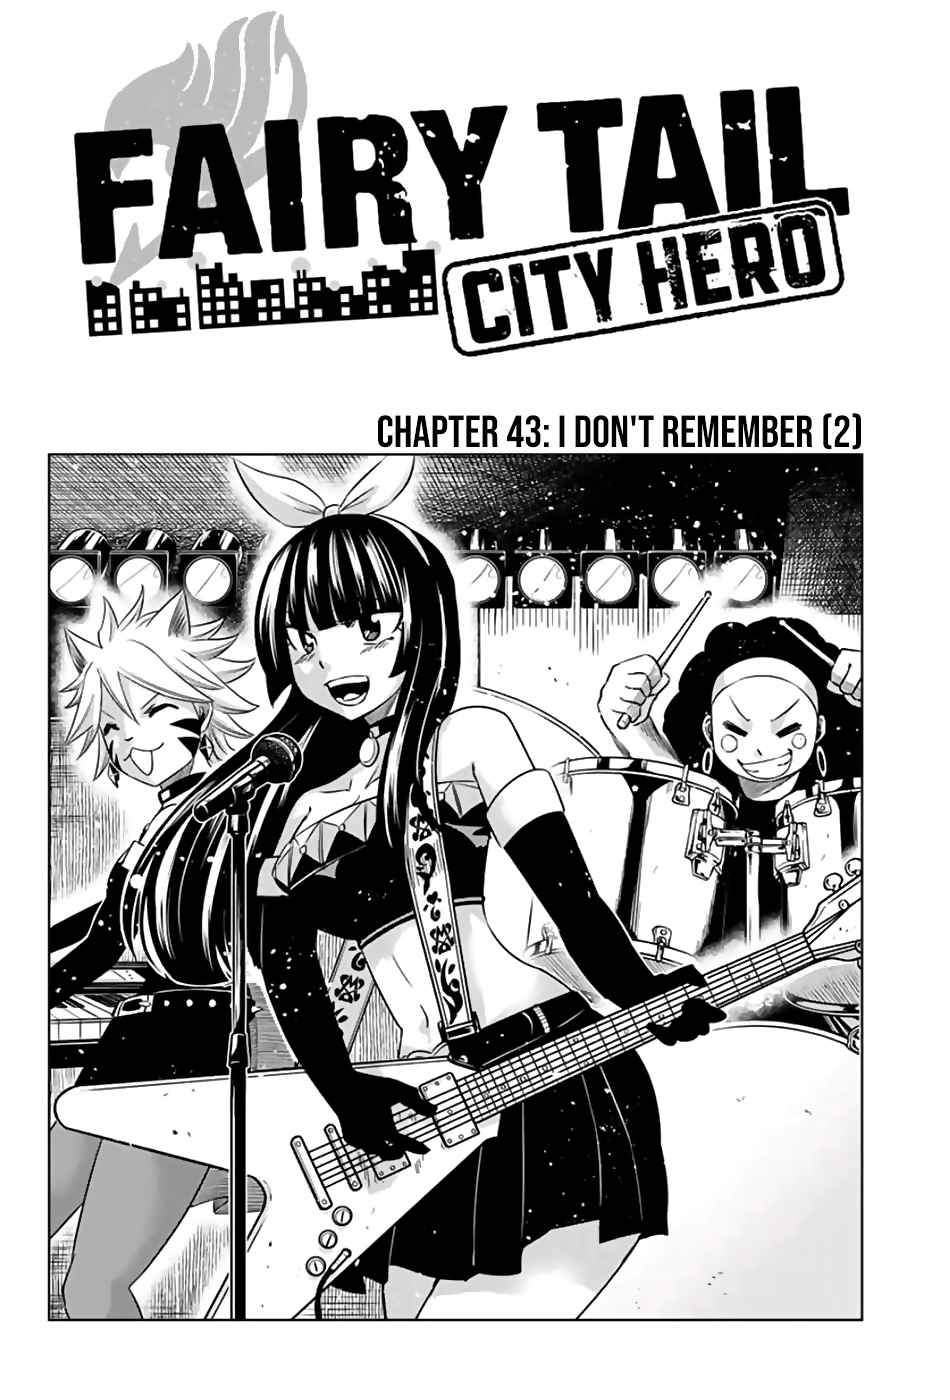 Fairy Tail: City Hero Ch. 43 I Don't Remember (2)